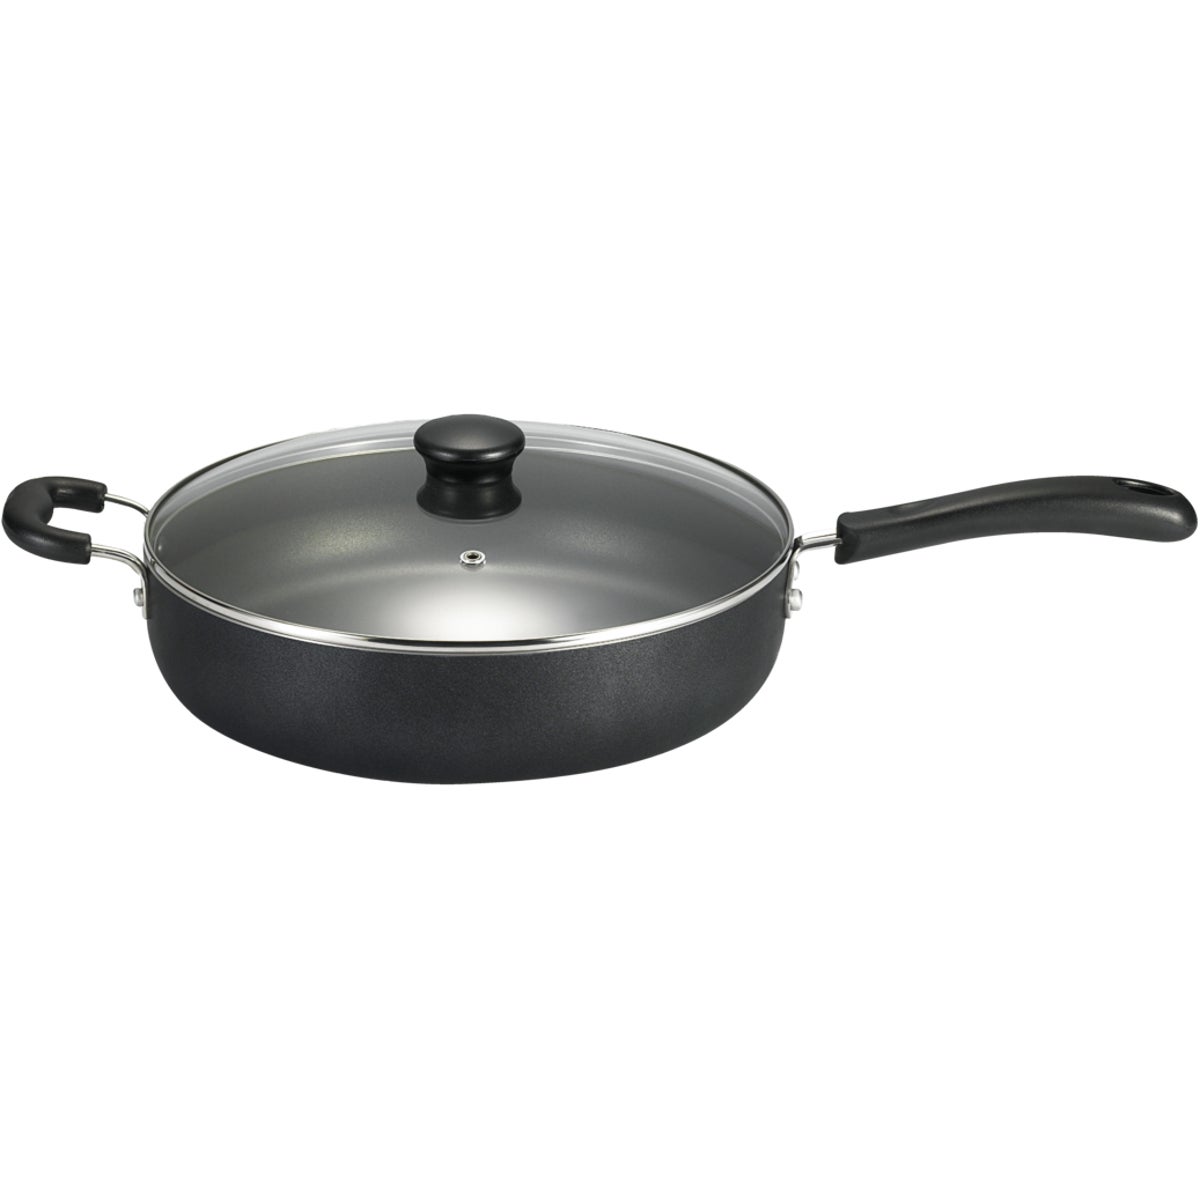 Specialty 5 Qt. Gray Non-Stick Jumbo Cooker with Inverted Lid